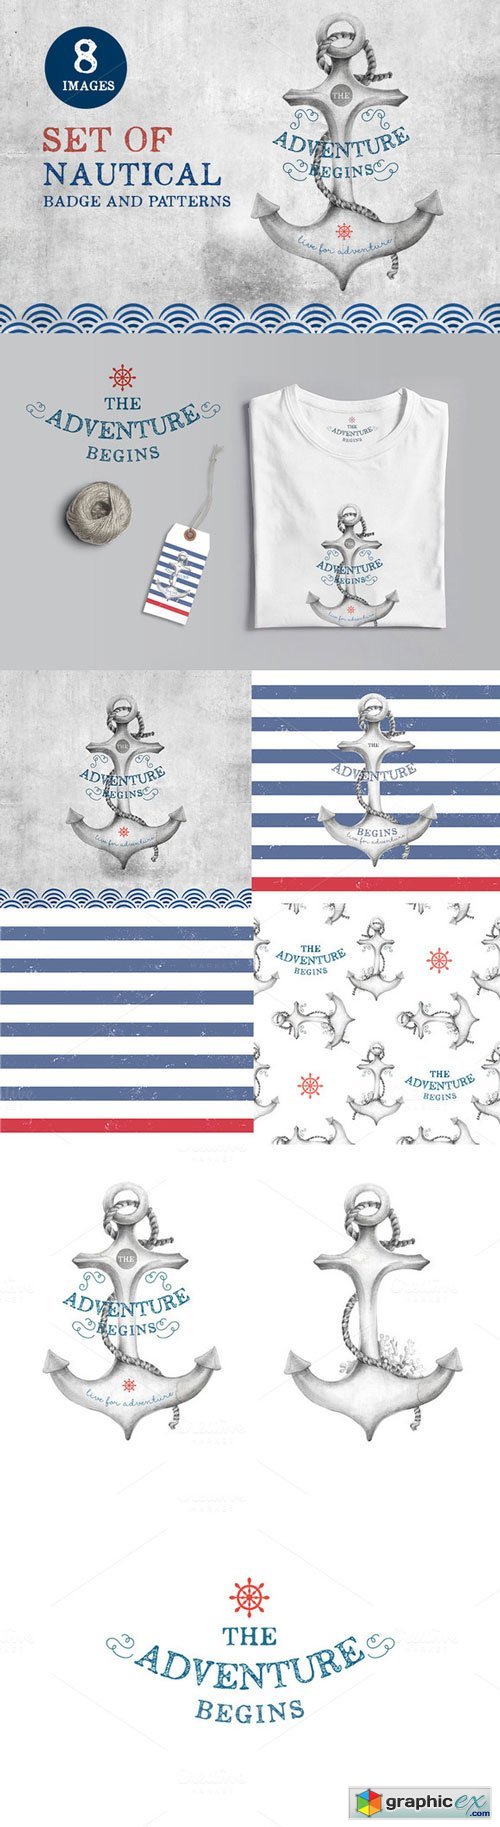 CM - Set of nautical badge and patterns - 55470